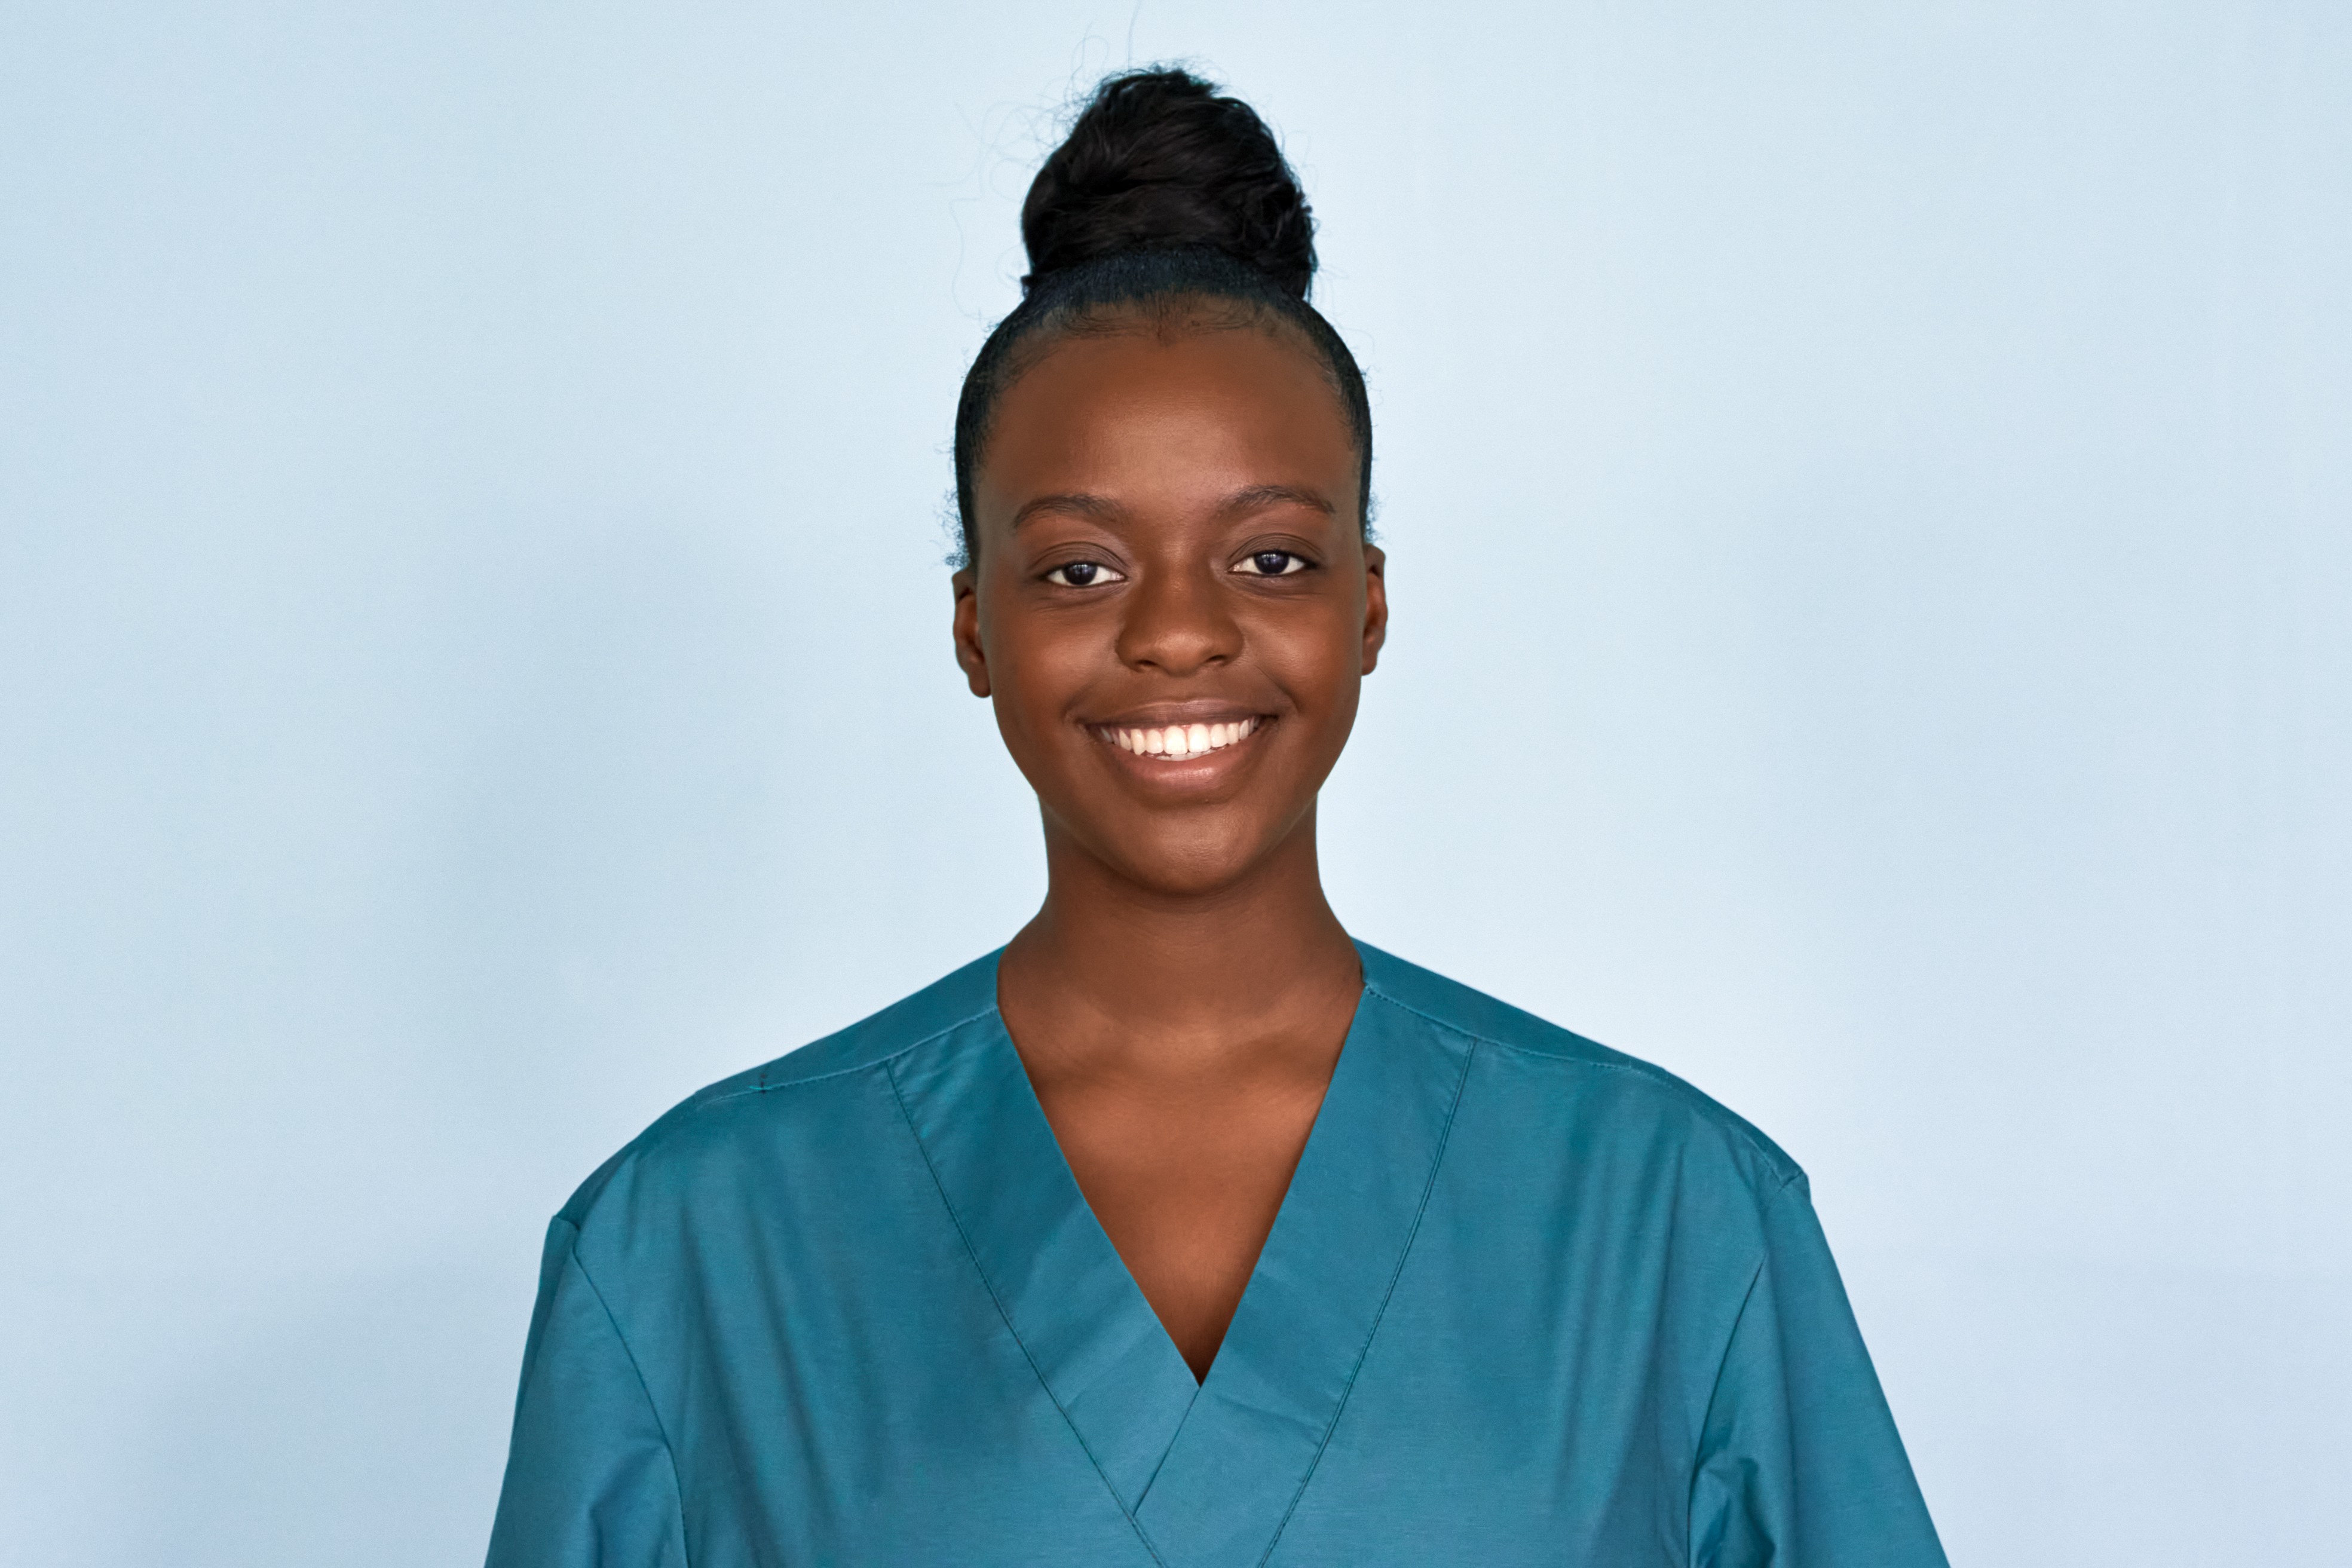 A female private duty aide wearing teal scrubs smiles at camera.